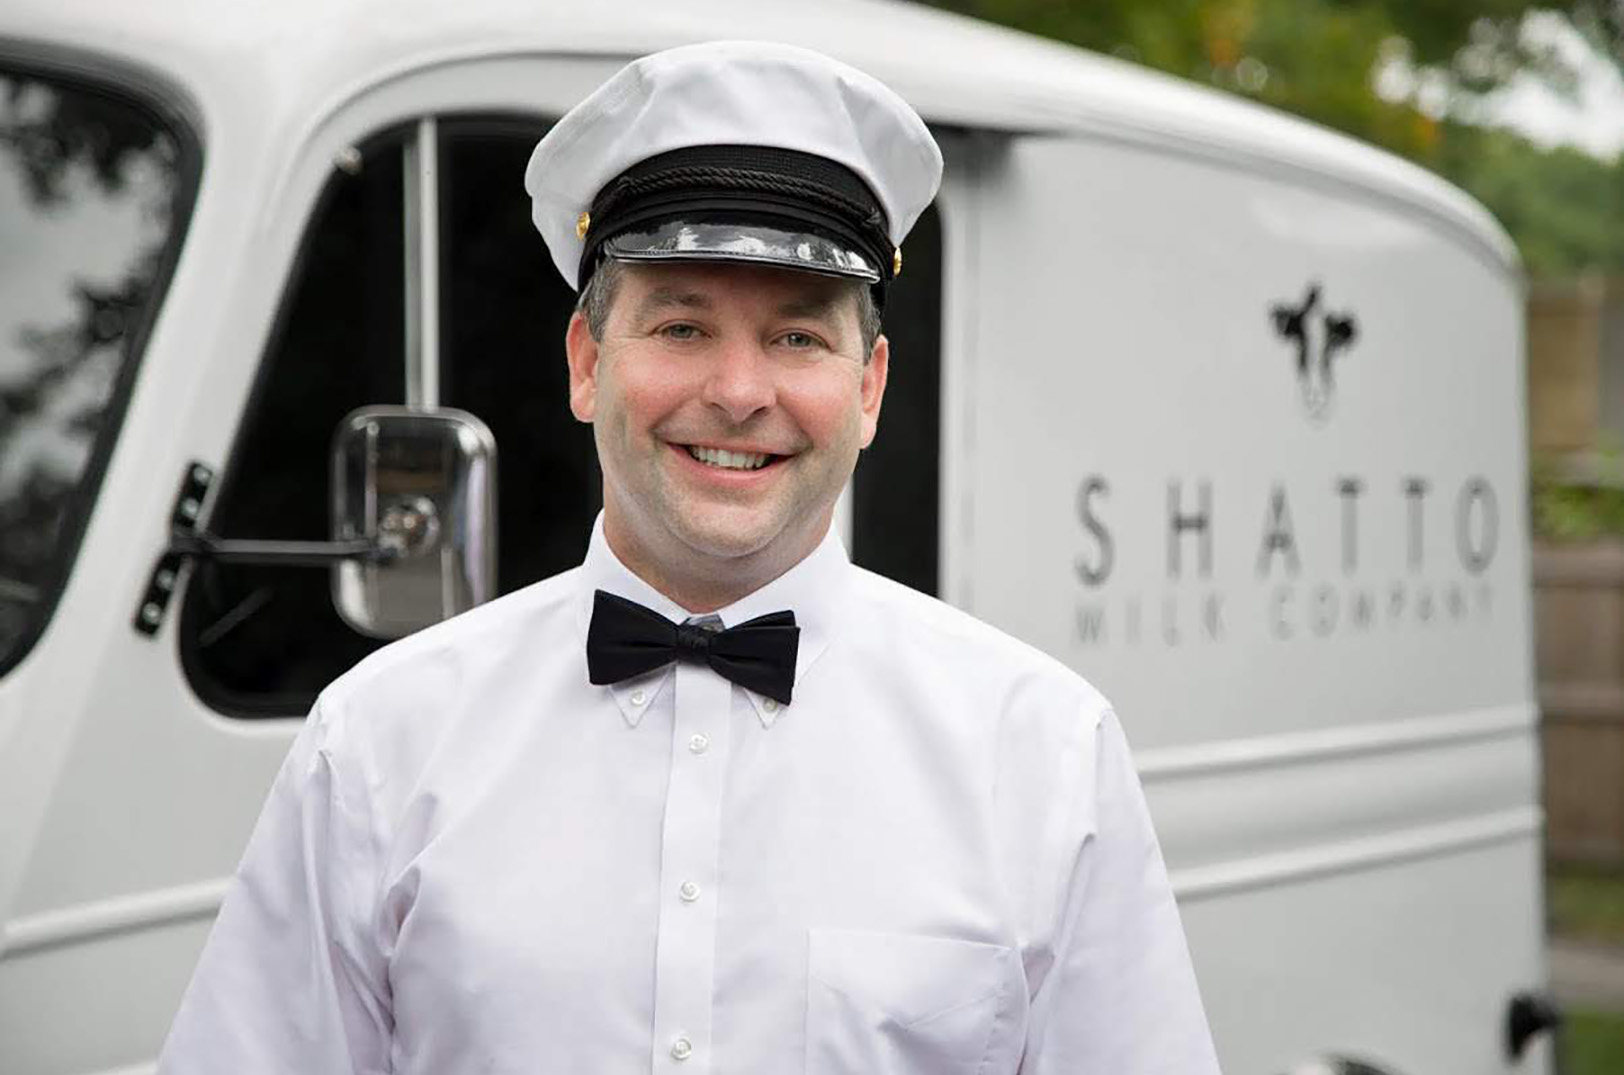 This milkman delivers community impact: Why Shatto added local makers’ products to its trucks